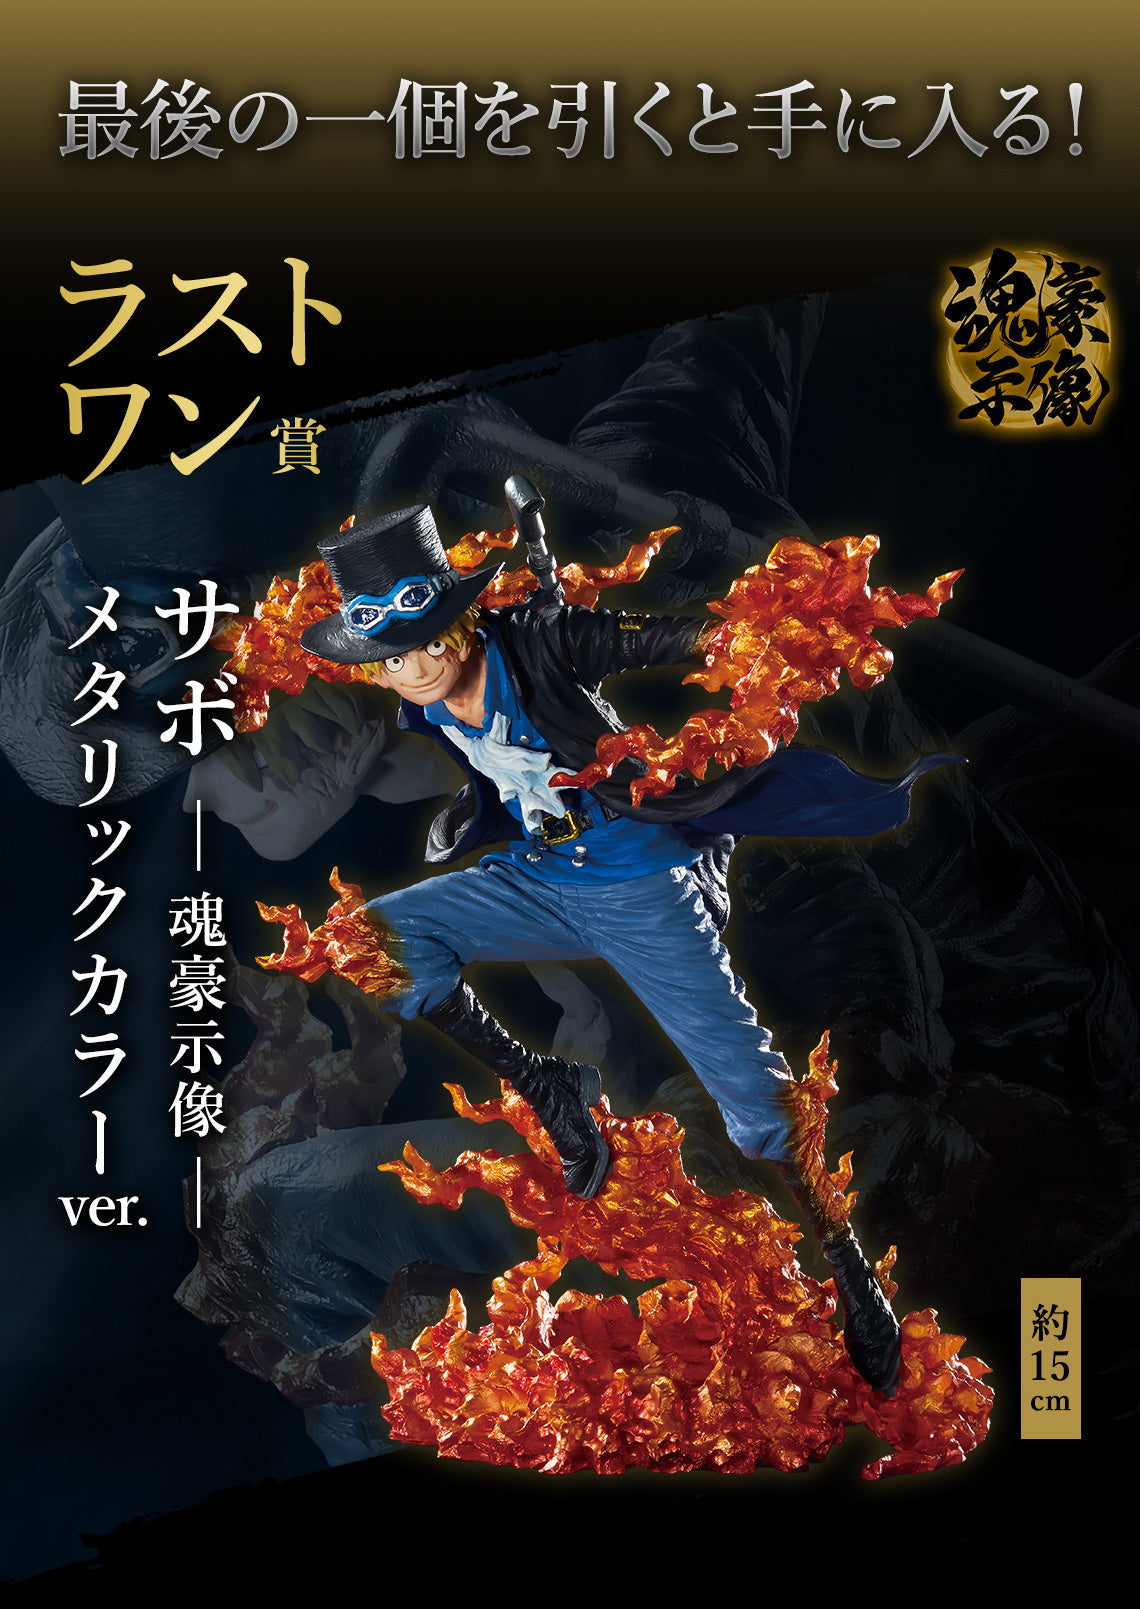 Ichiban Kuji One Piece EX Devils Vol.2-Bandai-Ace Cards &amp; Collectibles